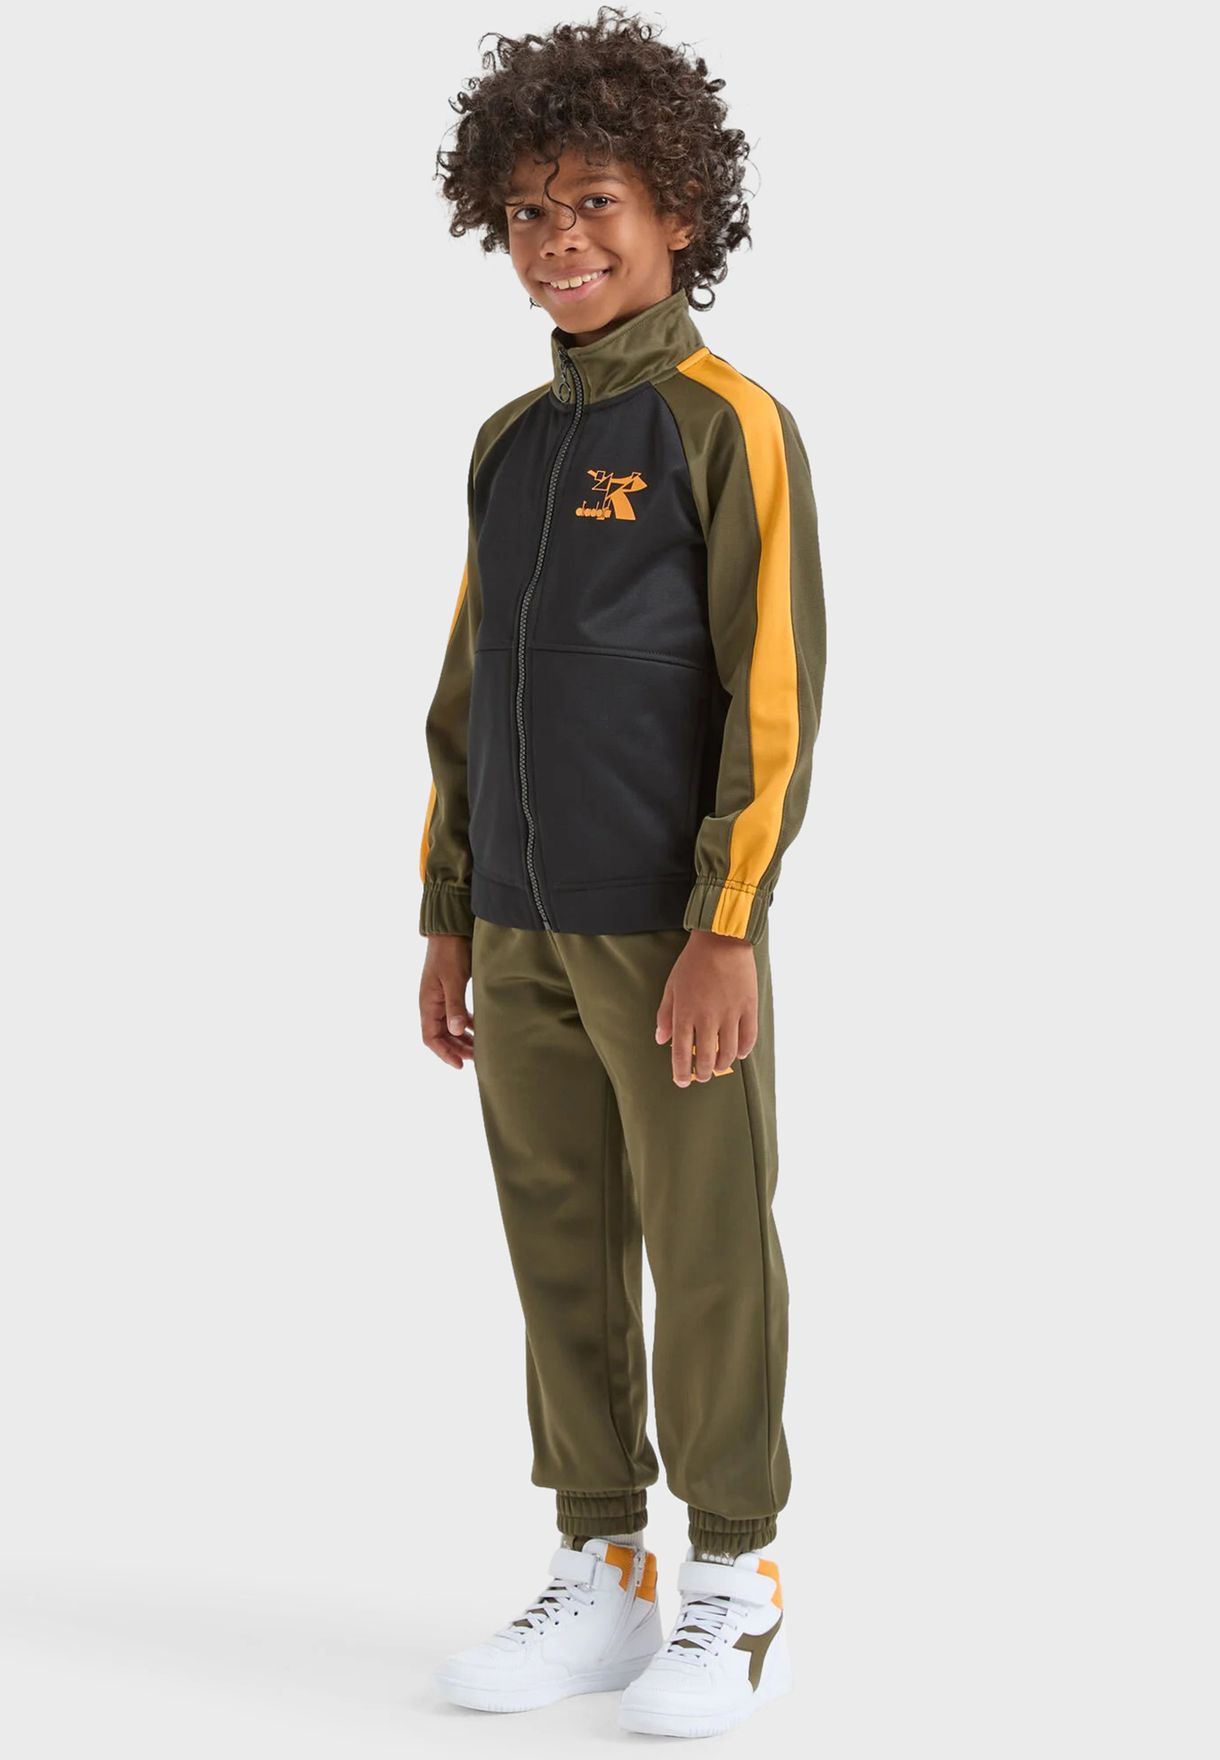 Youth Twister Tracksuit